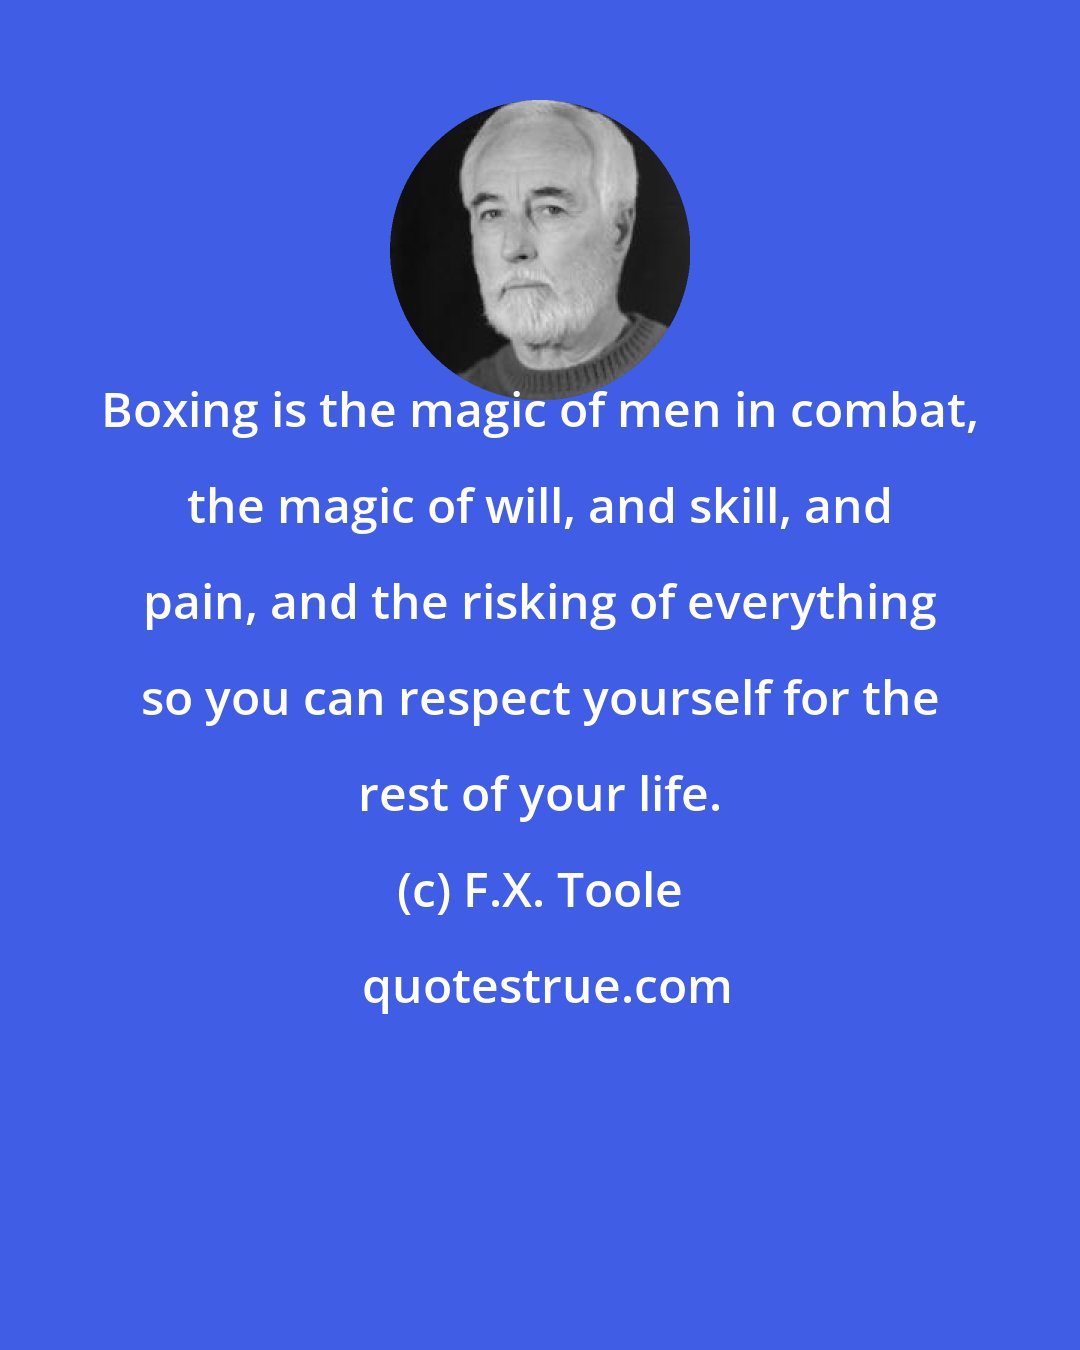 F.X. Toole: Boxing is the magic of men in combat, the magic of will, and skill, and pain, and the risking of everything so you can respect yourself for the rest of your life.